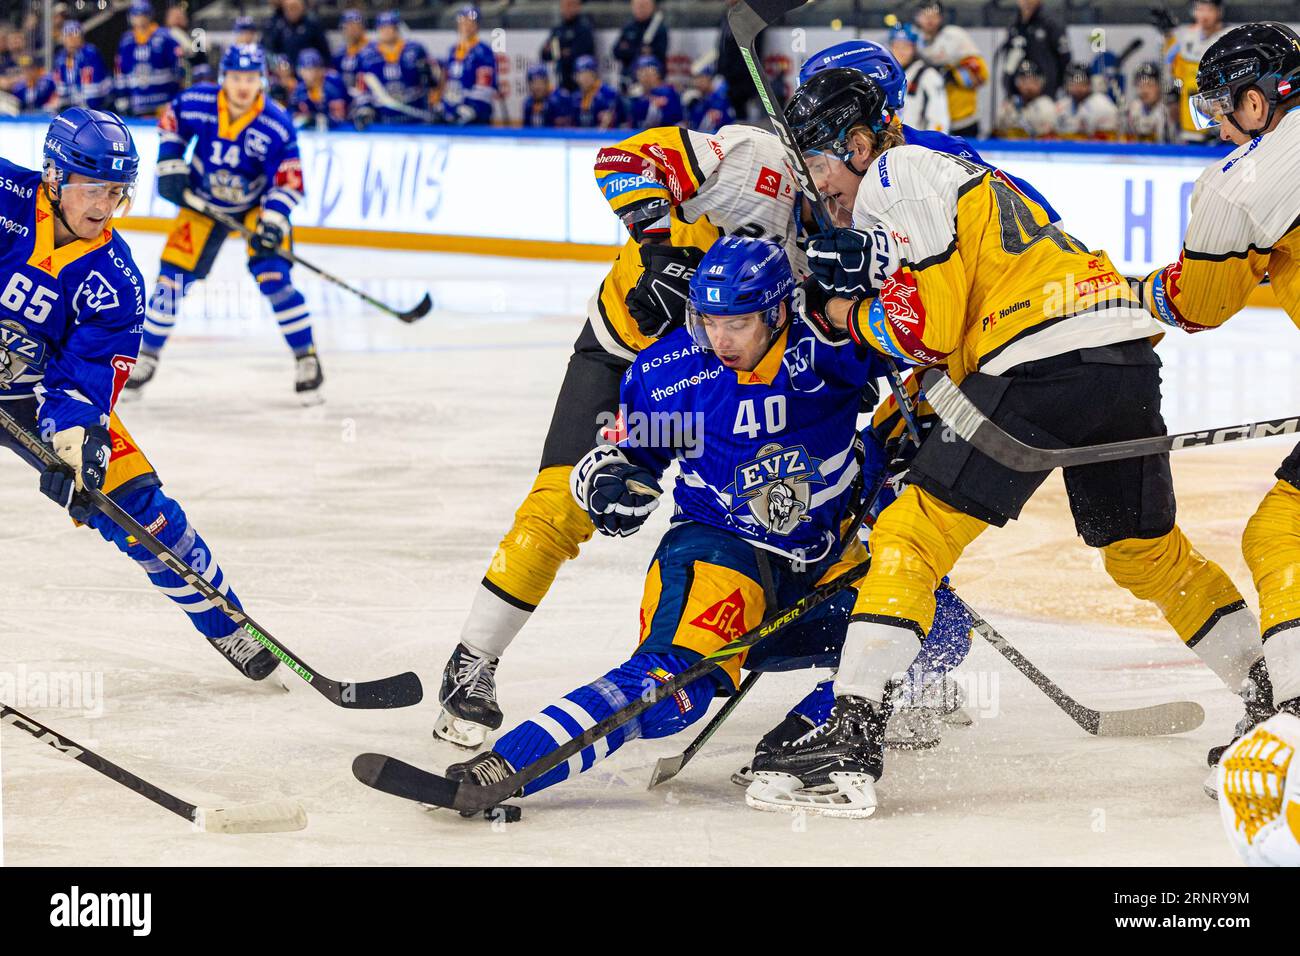 Andreas Wingerli #40 (EV Zug) during the National League preparatory ice hockey game between EV Zug and HC Verva Litvinov on September 1st, 2023 in the Bossard Arena in Zug